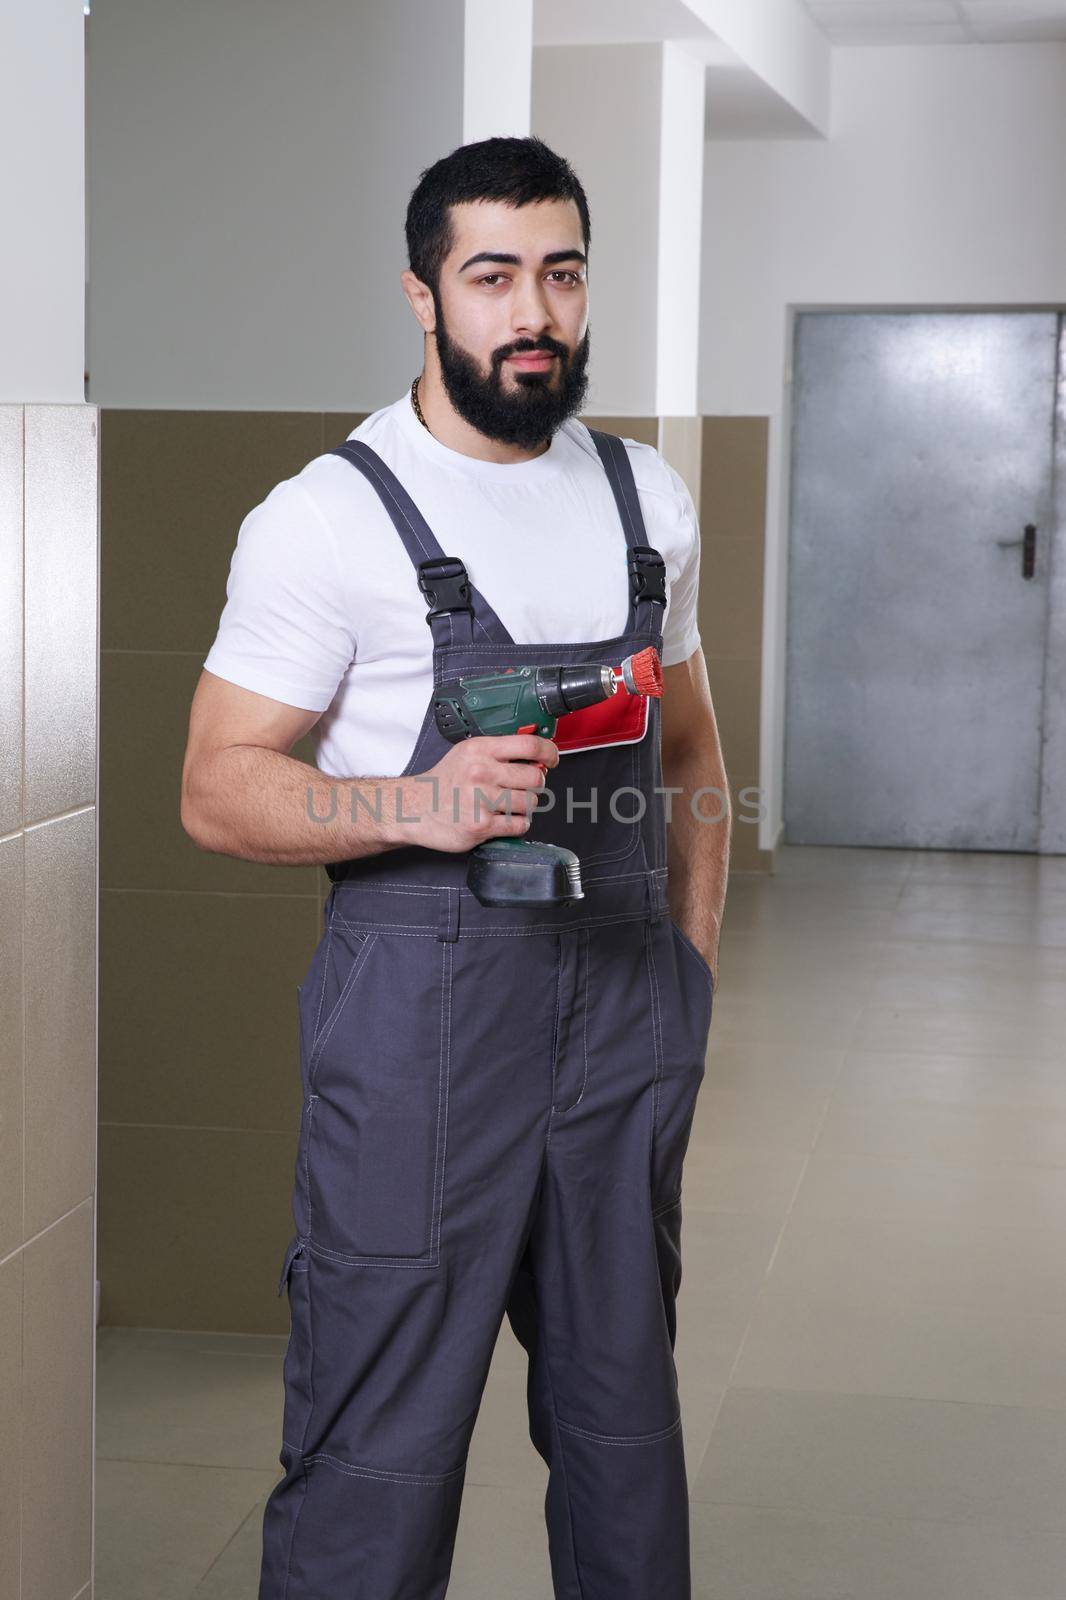 Worker wearing overalls standing and holding electric screwdriver or drill by Mariakray